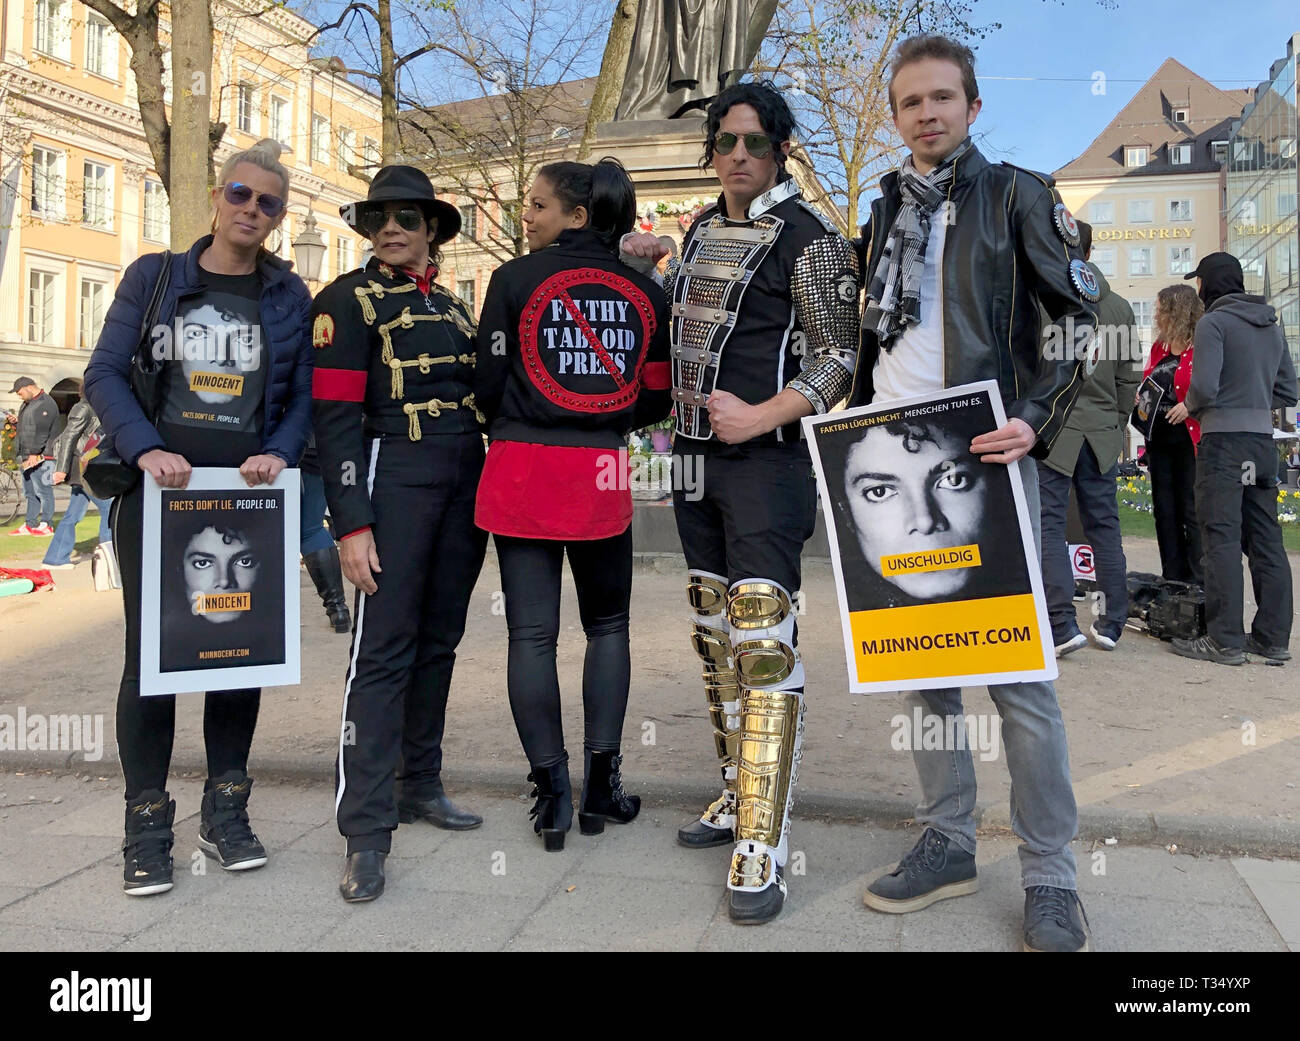 Munich, Germany. 06 April 2019, Bavaria, München: Fans of the 'King of Pop', Michael Jackson, and fans with posters with the inscription 'Innocent' ('innocent') stand in front of the monument to Orlando-di-Lasso, a Renaissance composer and Kapellmeister, which was converted into a Michael Jackson monument in front of the Bavarian Court. They demonstrate against the broadcast of the documentary 'Leaving Neverland' about the pop star Michael Jackson on 06.04.2019 on ProSieben. Photo: Valentin Gensch/dpa/Alamy Live News Stock Photo